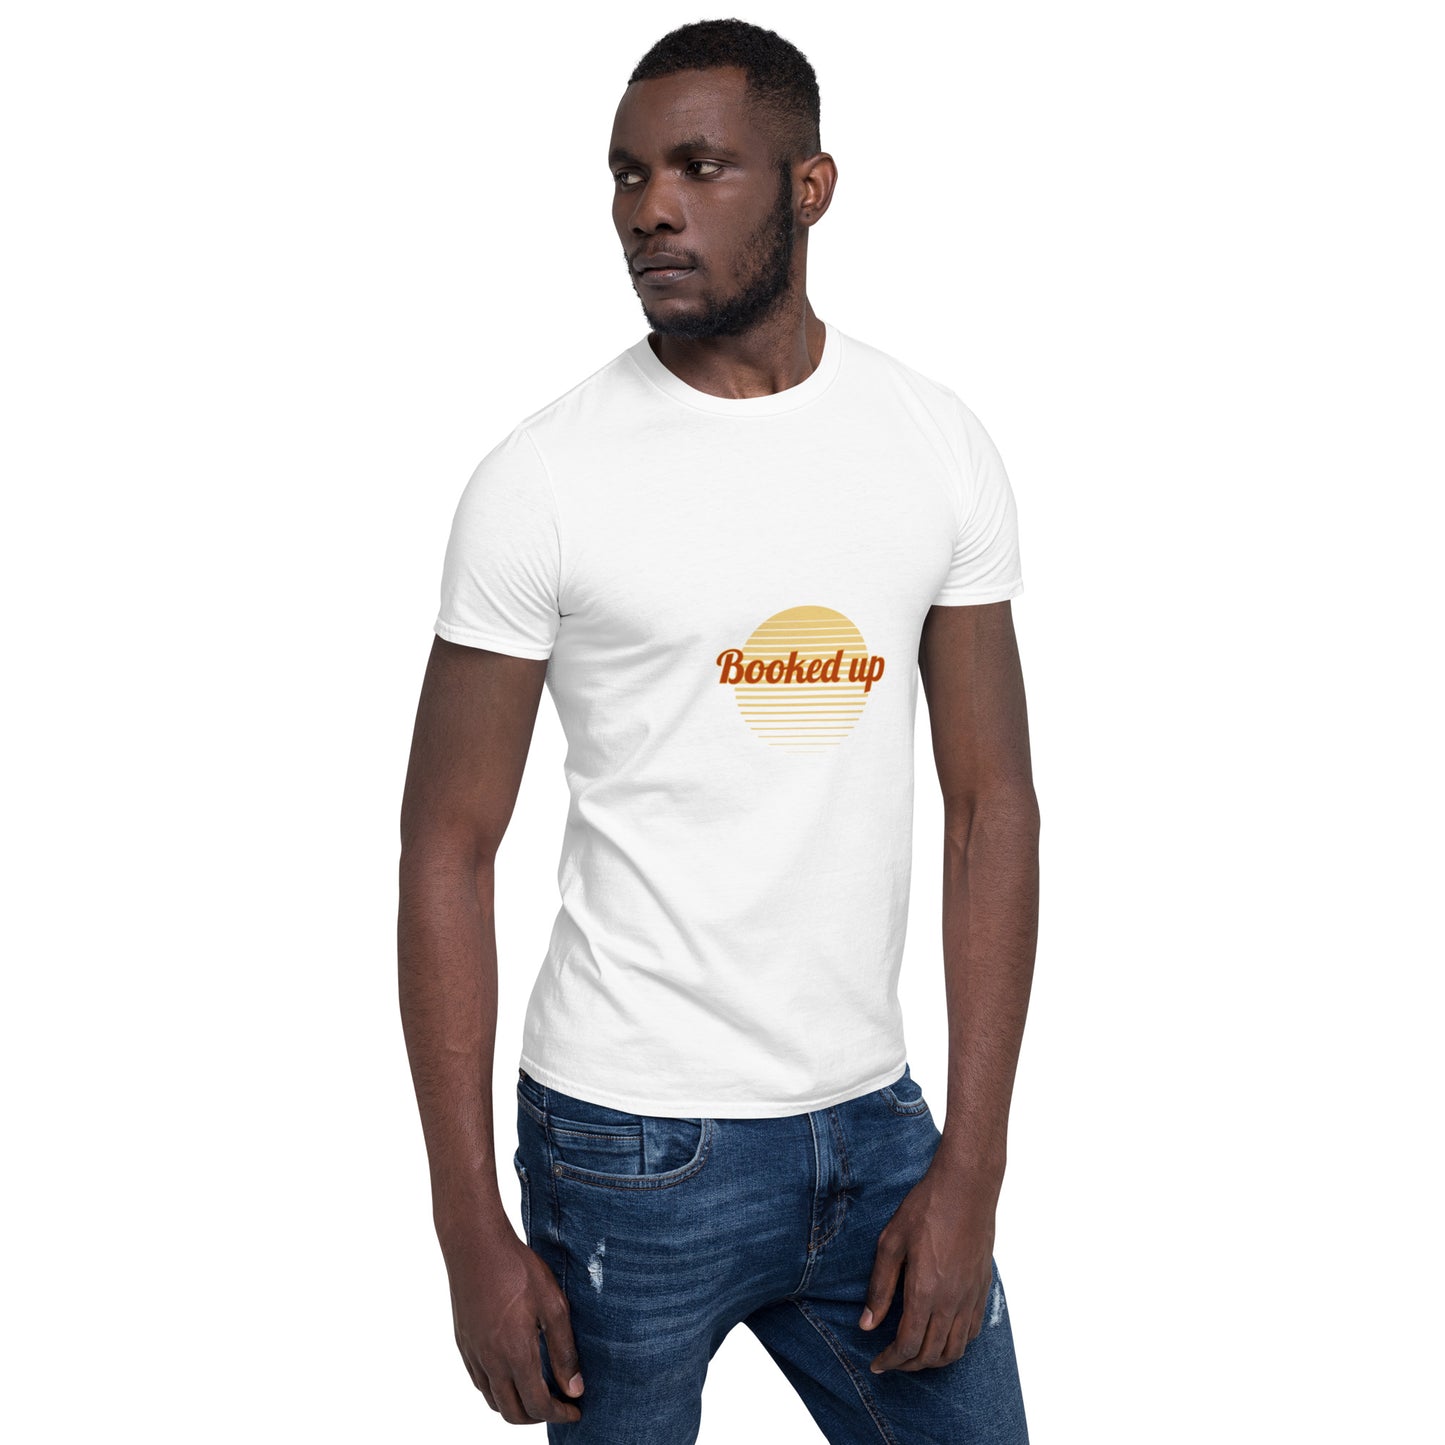 Booked up T-Shirt